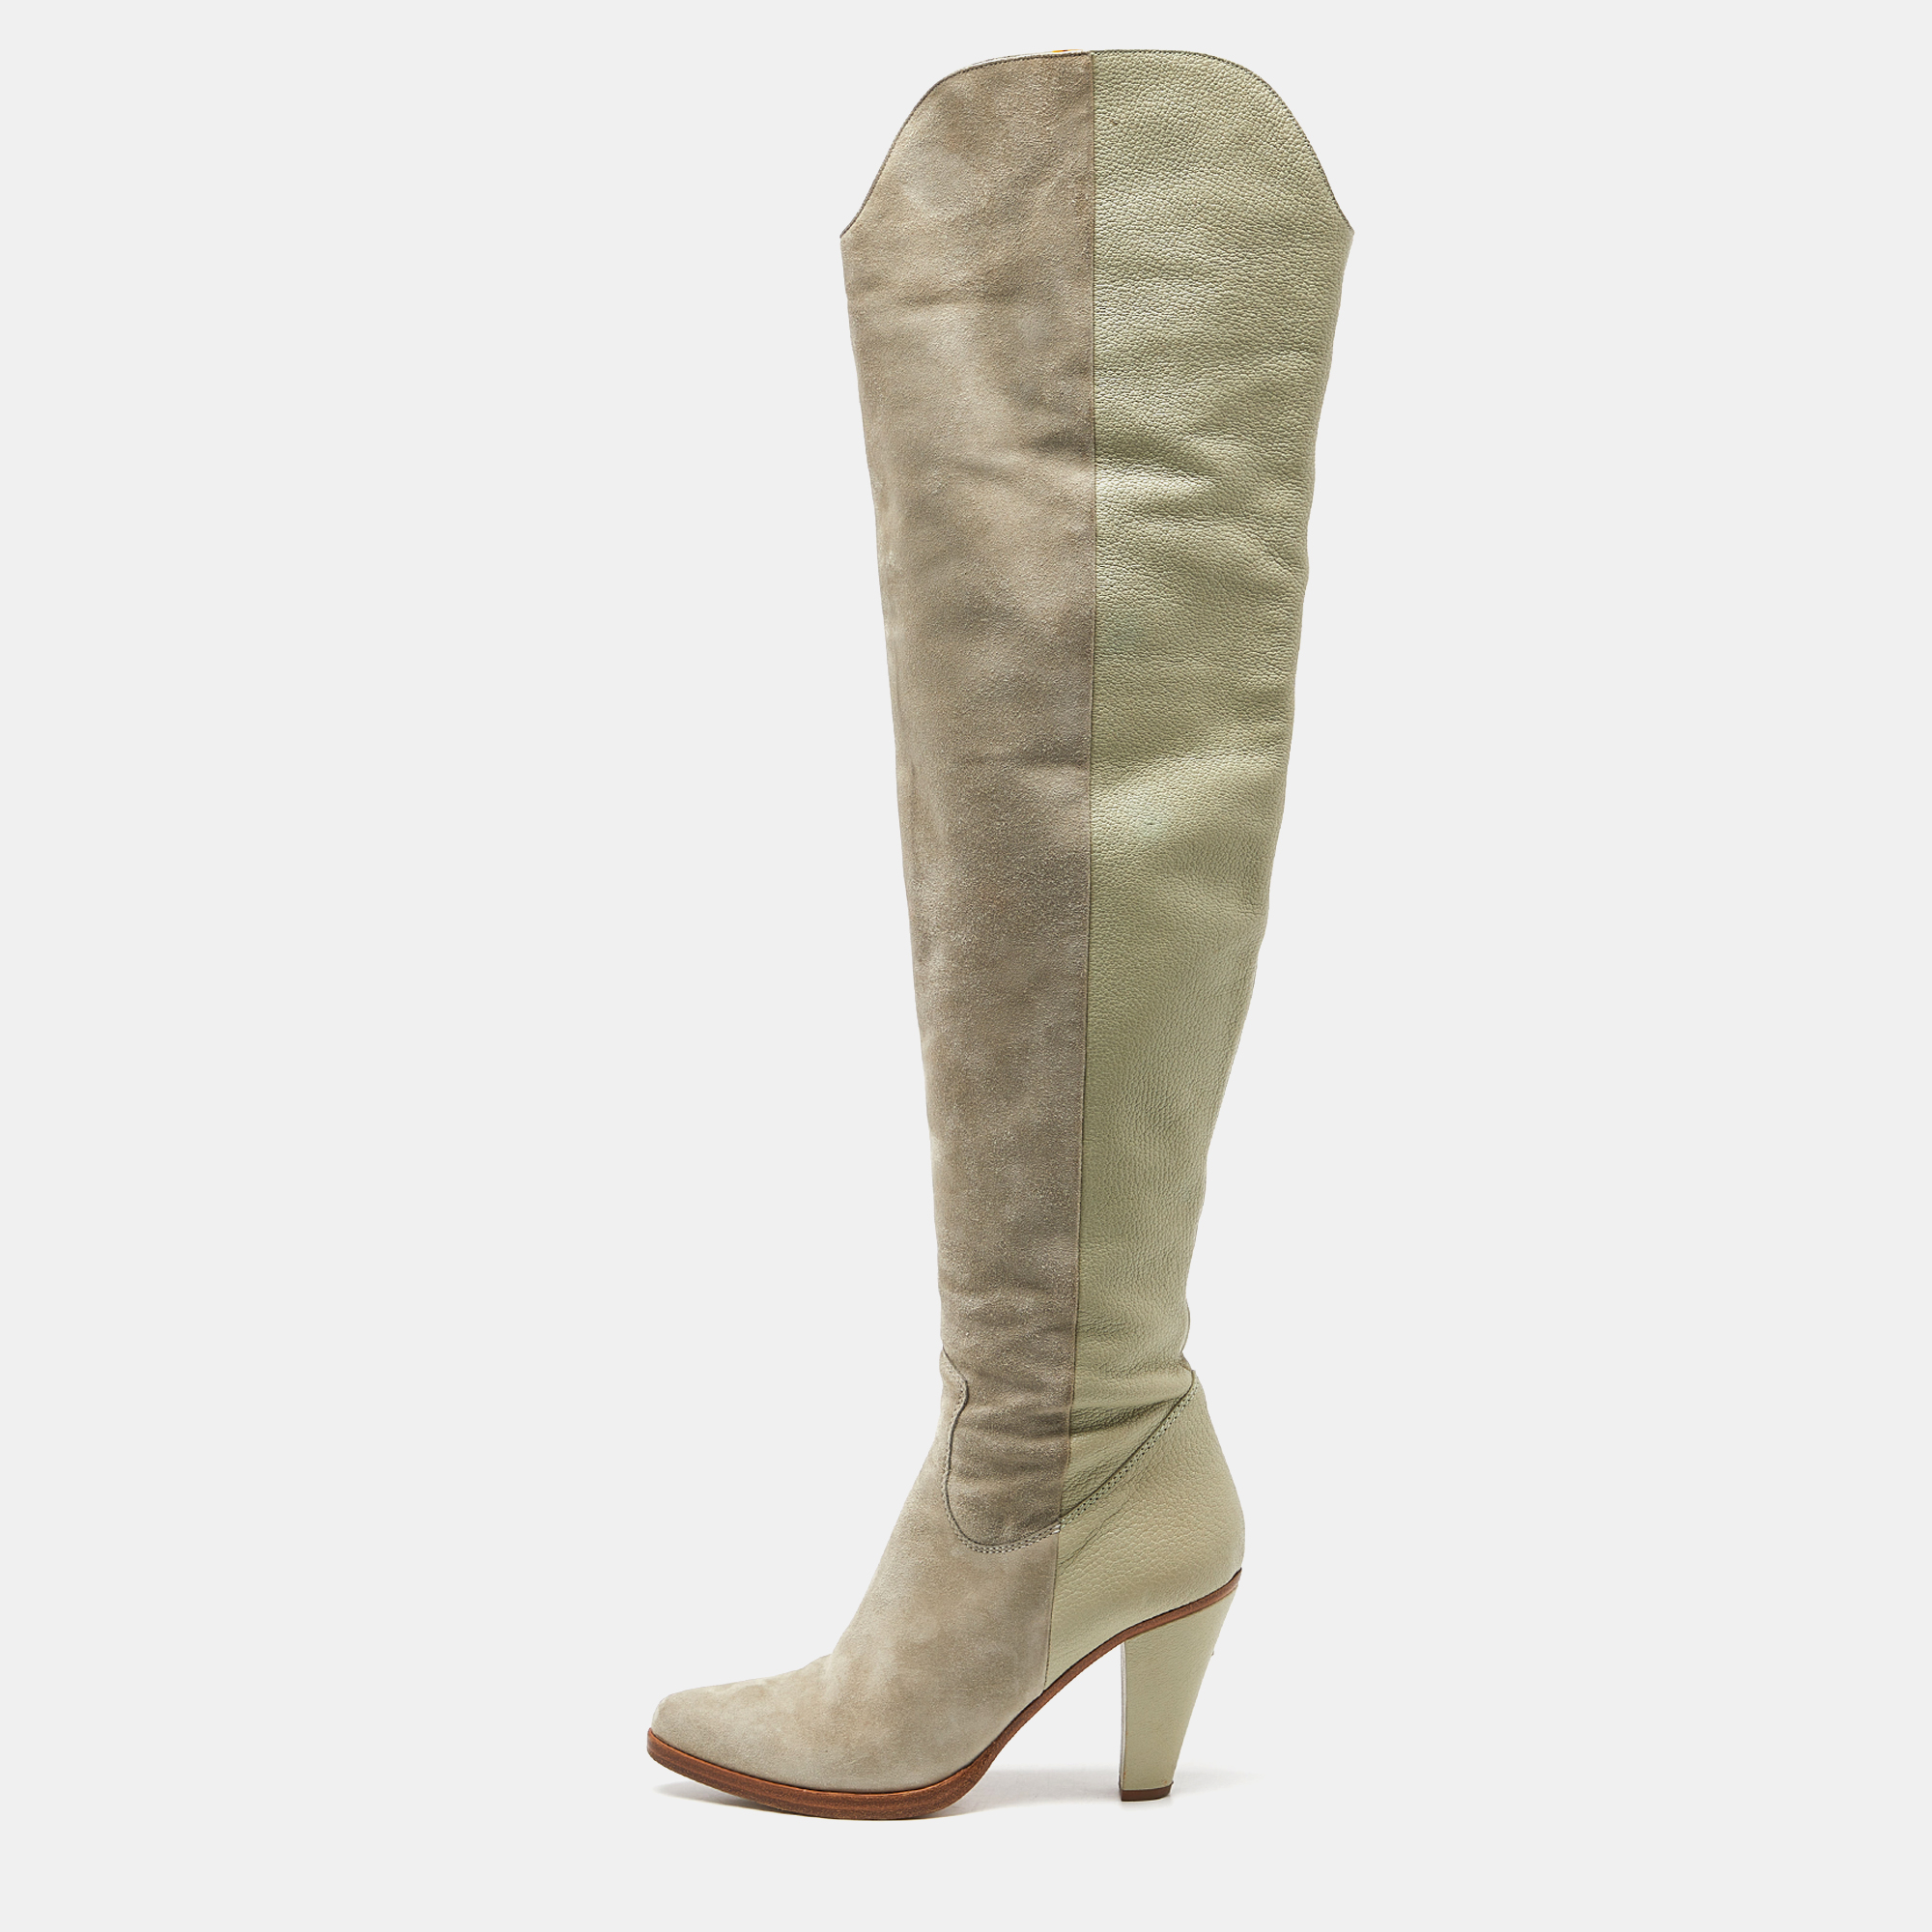 

Chloe Grey Suede and Leather Over The Knee Length Boots Size